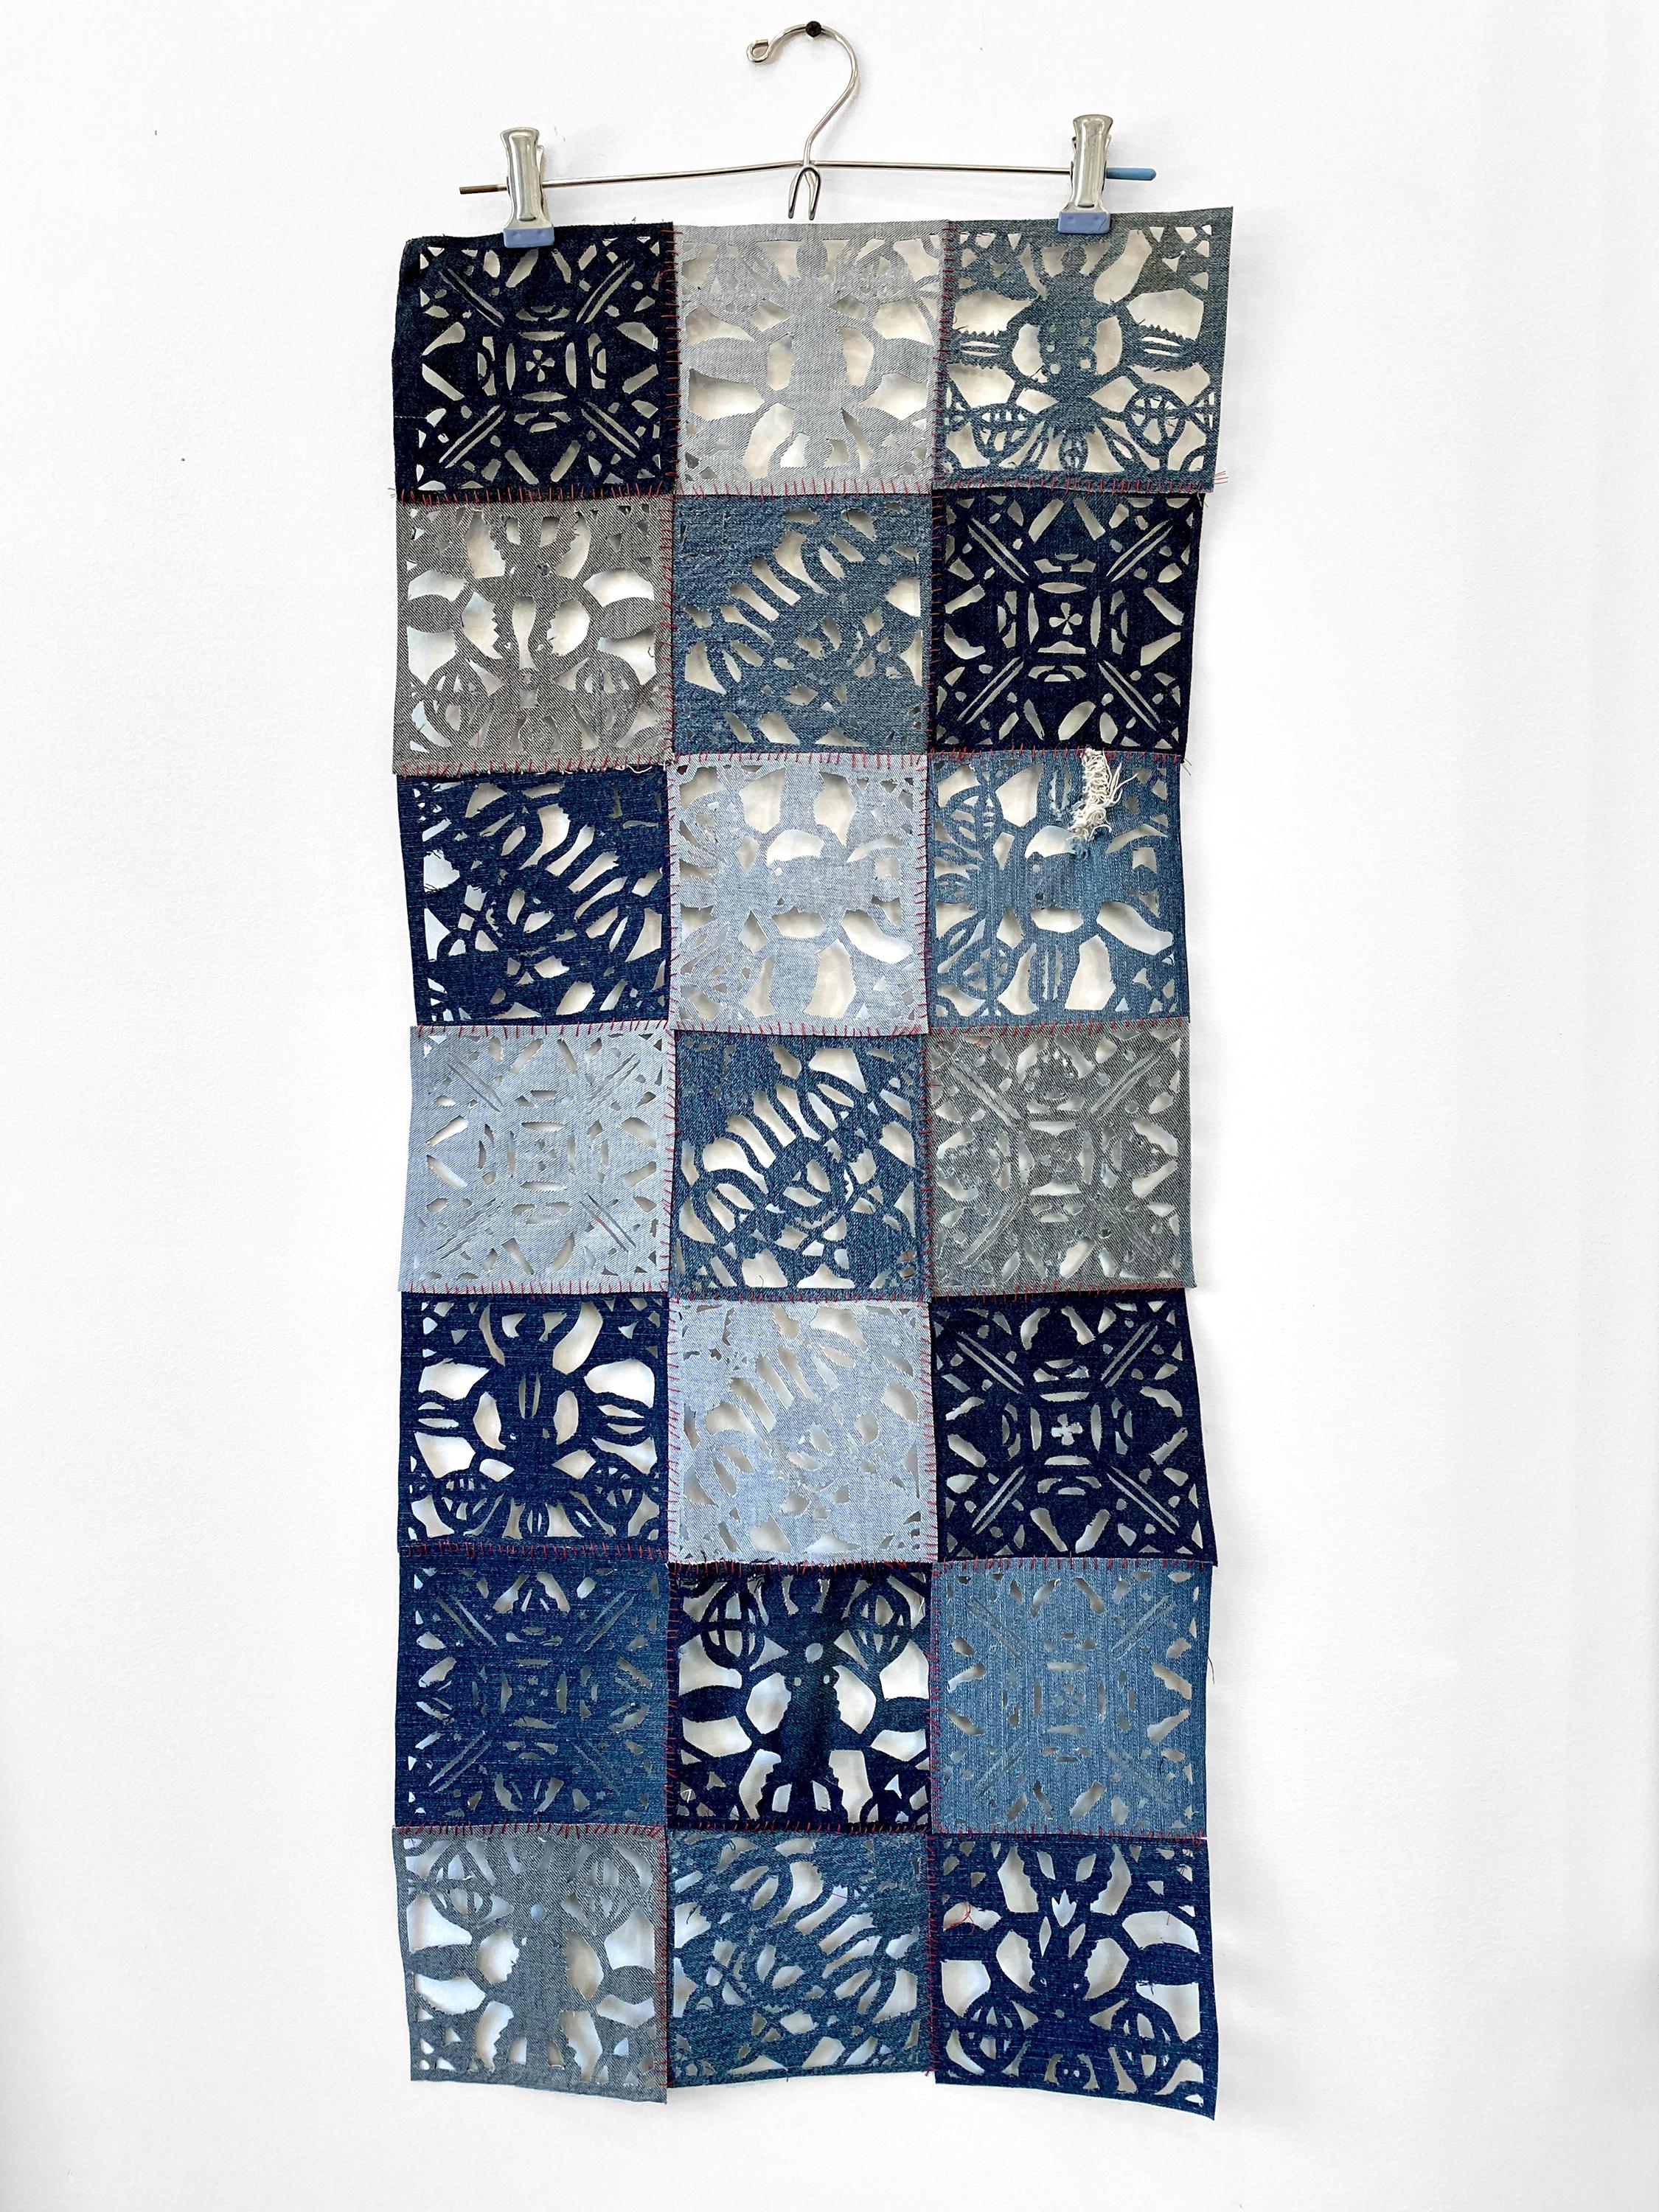 'Meticulously Distressed Denim, Patchwork' - patterns - Eva Hesse - Mixed Media Art by Libby Newell